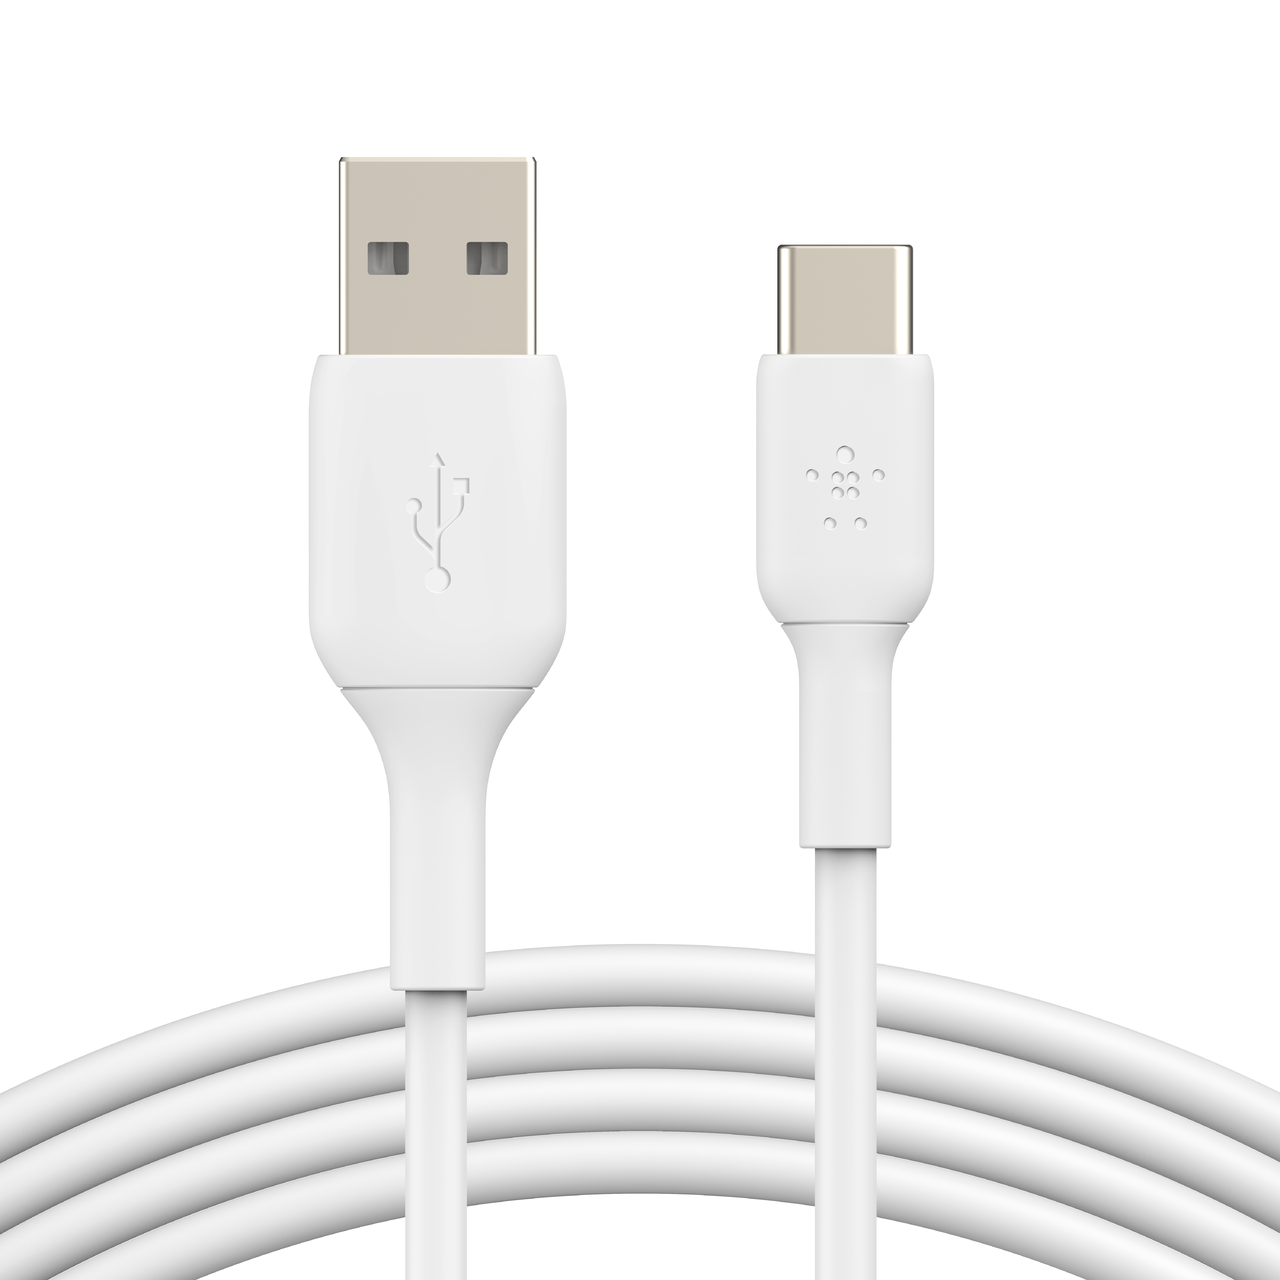 Belkin BoostCharge USB-C to USB-A Cable (1m / 3.3ft, White), White